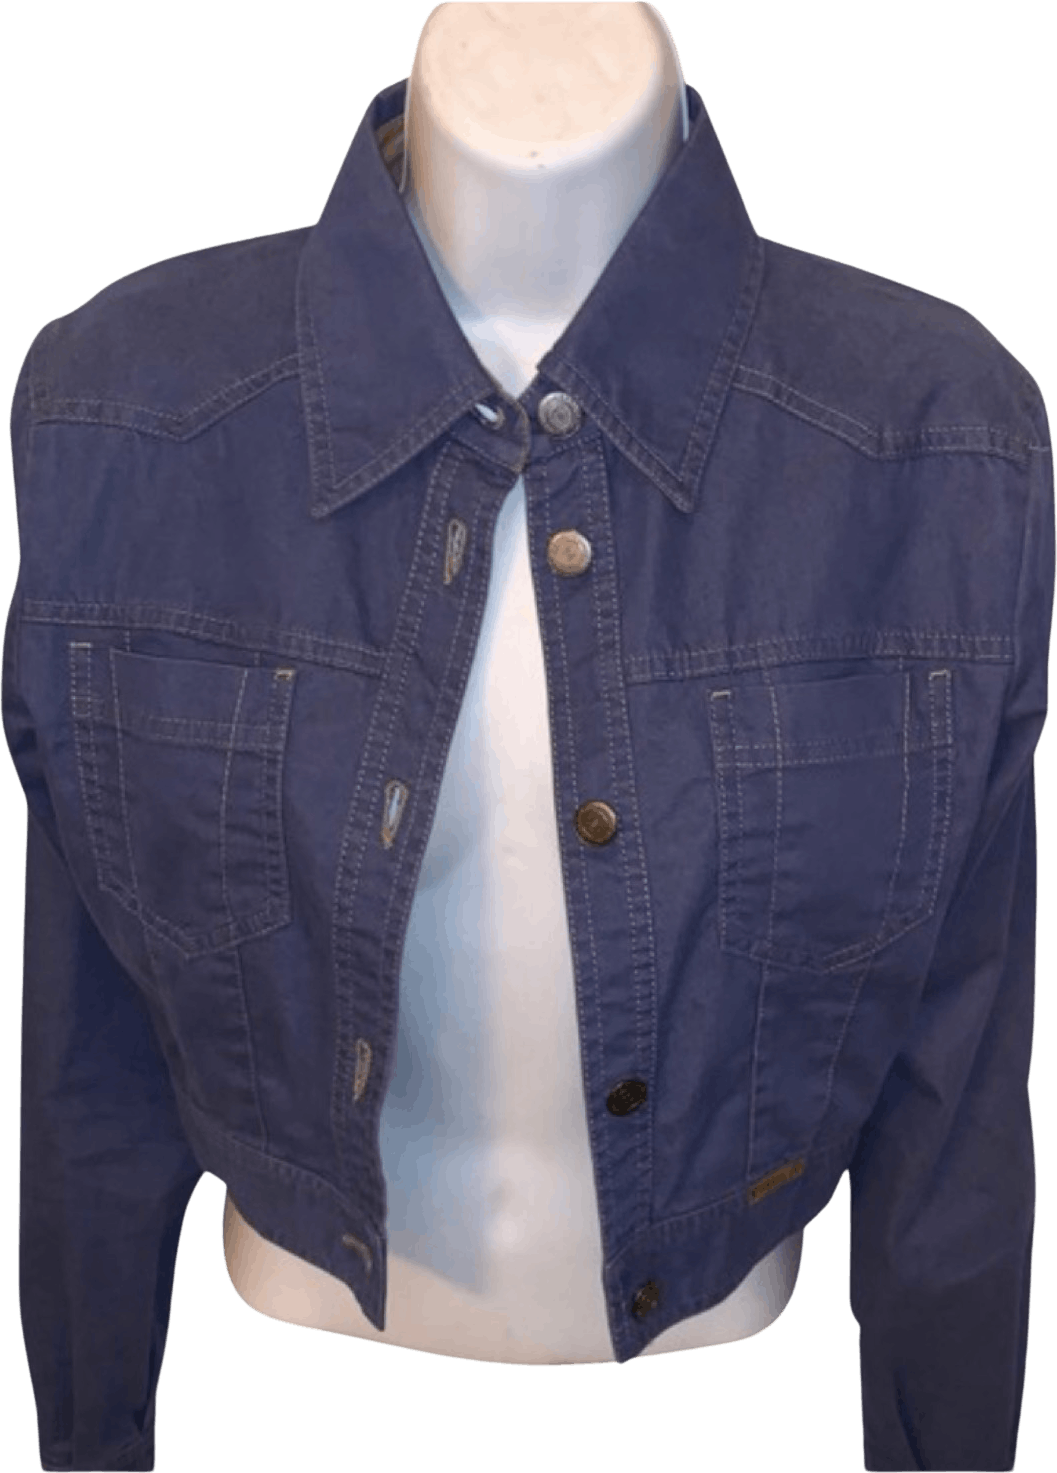 Vintage CHANEL 01A size 36 light weight denim jacket by Chanel